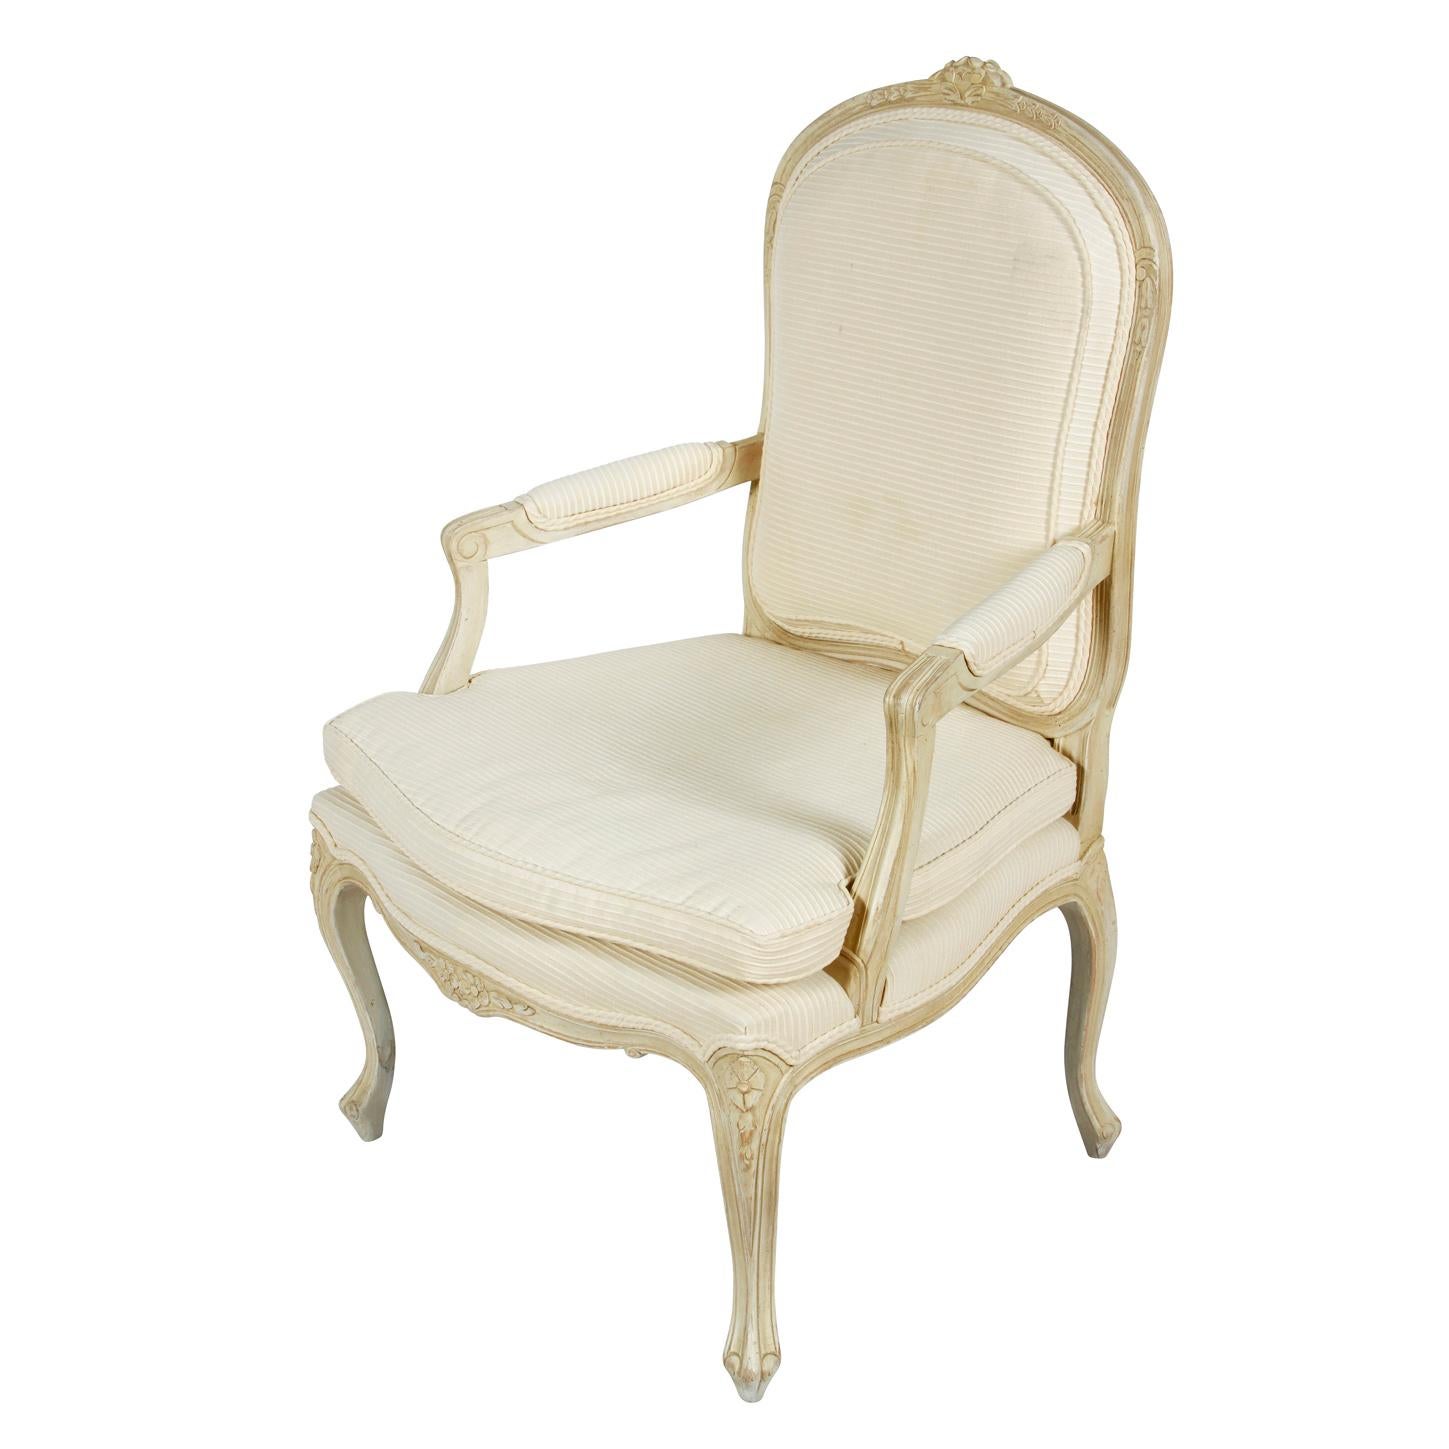 A pair of ivory and painted French bergeres chairs. The Louis XV style arm chairs are painted antique white and carved with floral details at the chair frame back, apron and cabriole legs. The chairs are upholstered in to the back, seat and arm